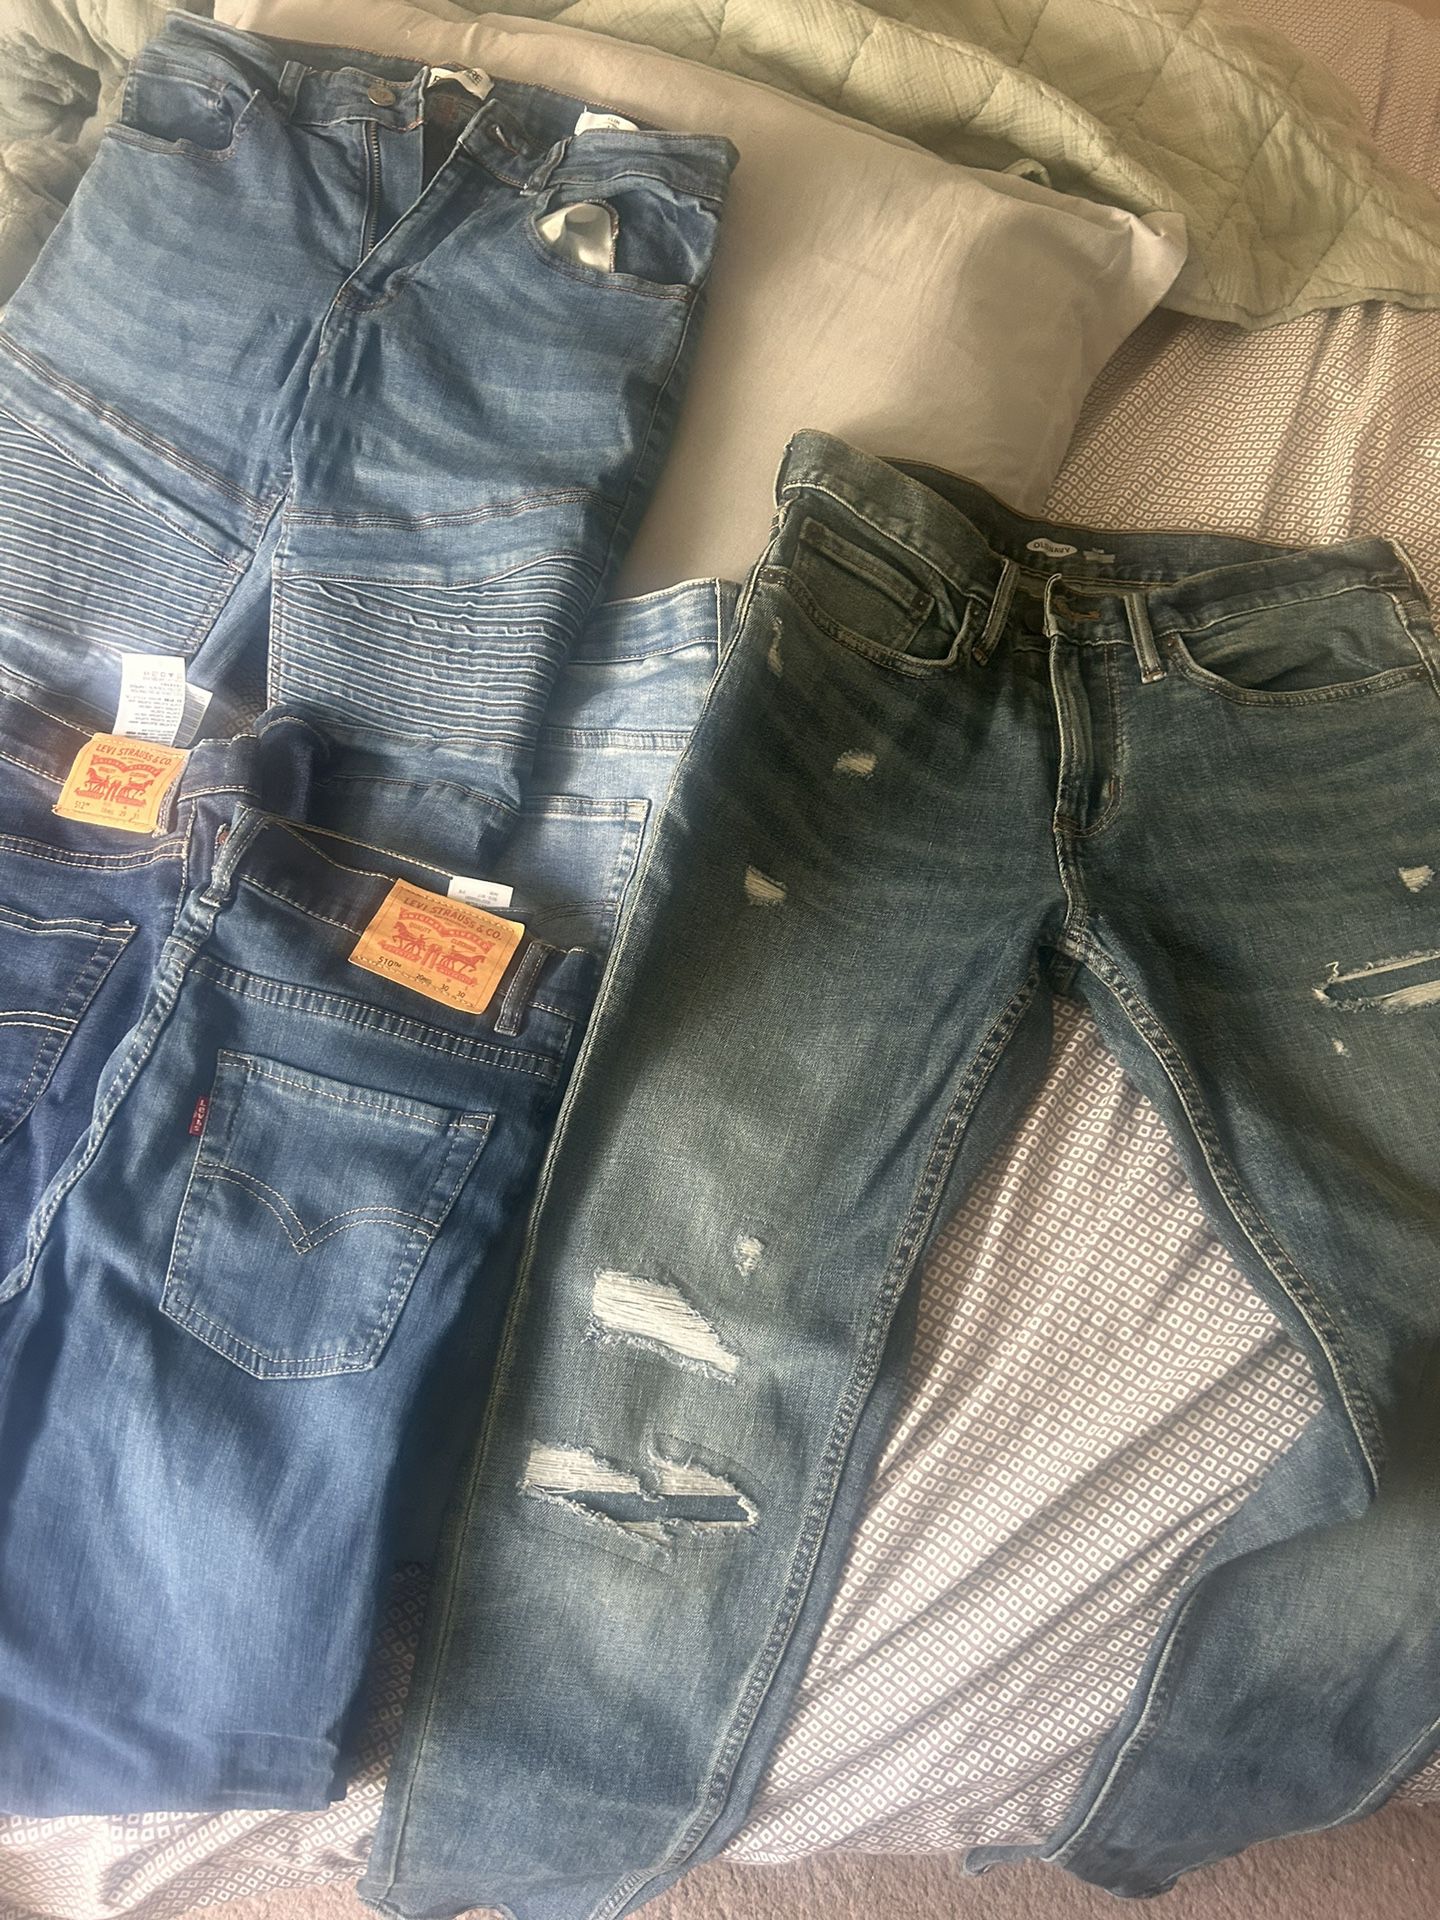 Teen jeans 6 Pair For $25